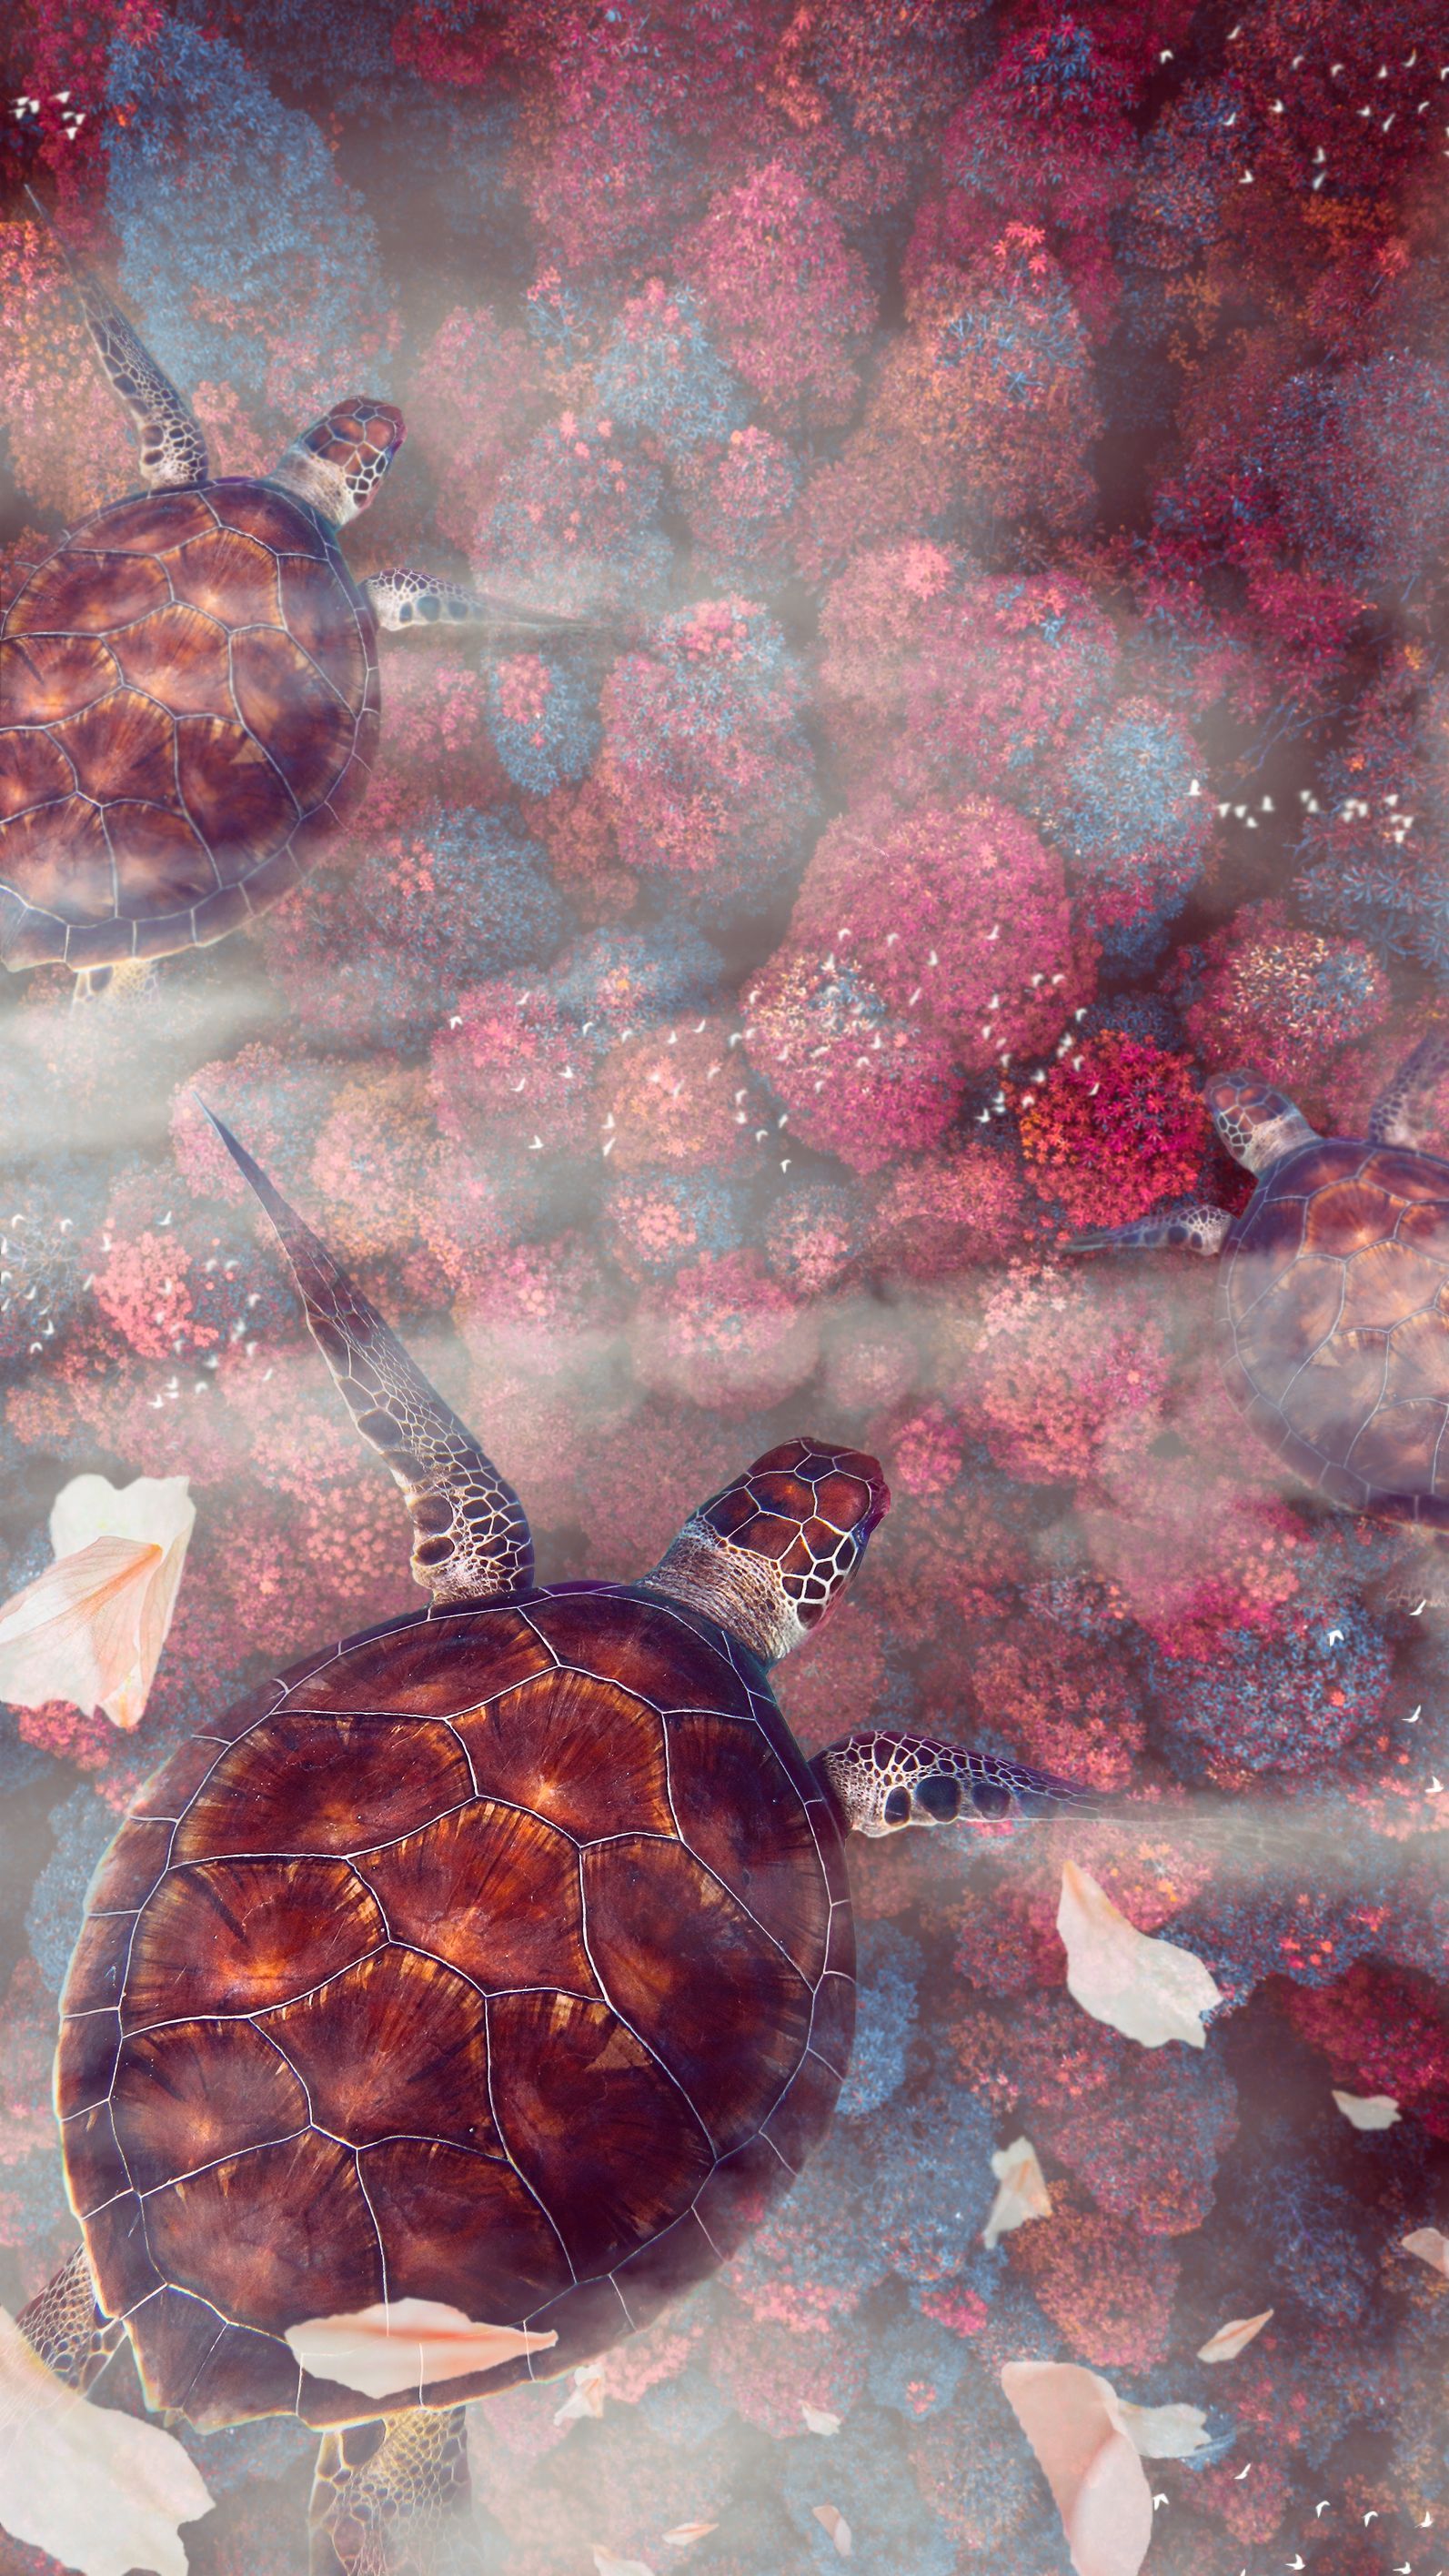 A turtle swimming in a body of water with pink and blue flowers. - Sea turtle, turtle